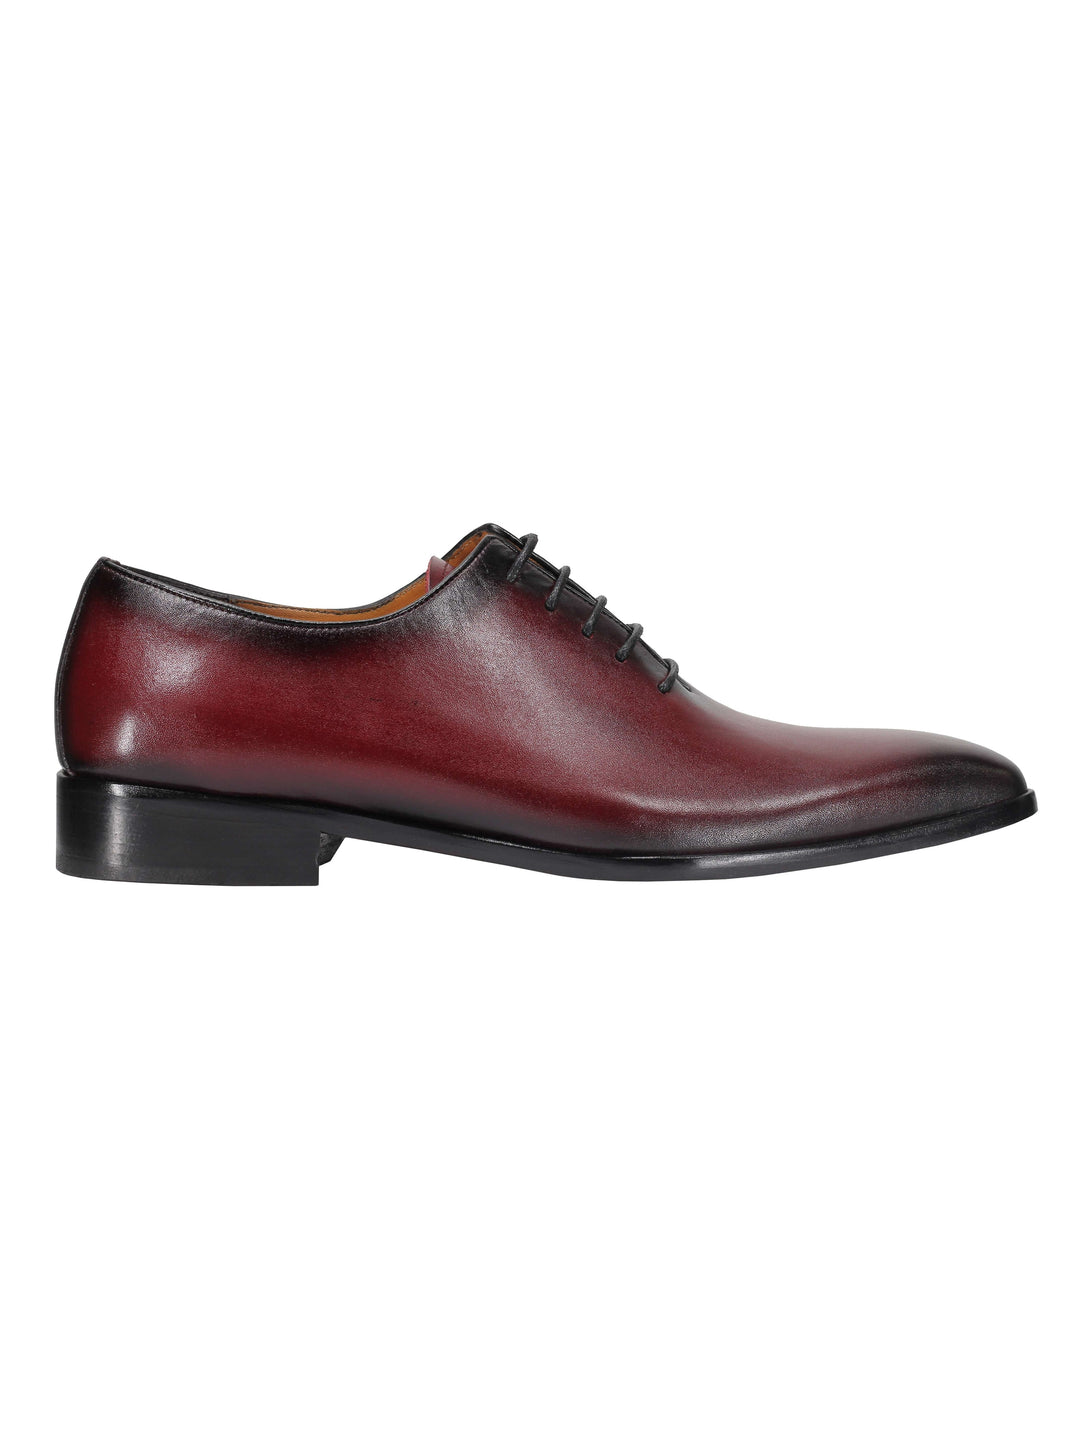 MAROON CALF LEATHER WHOLECUT OXFORD LACE UP SHOES – XPOSED